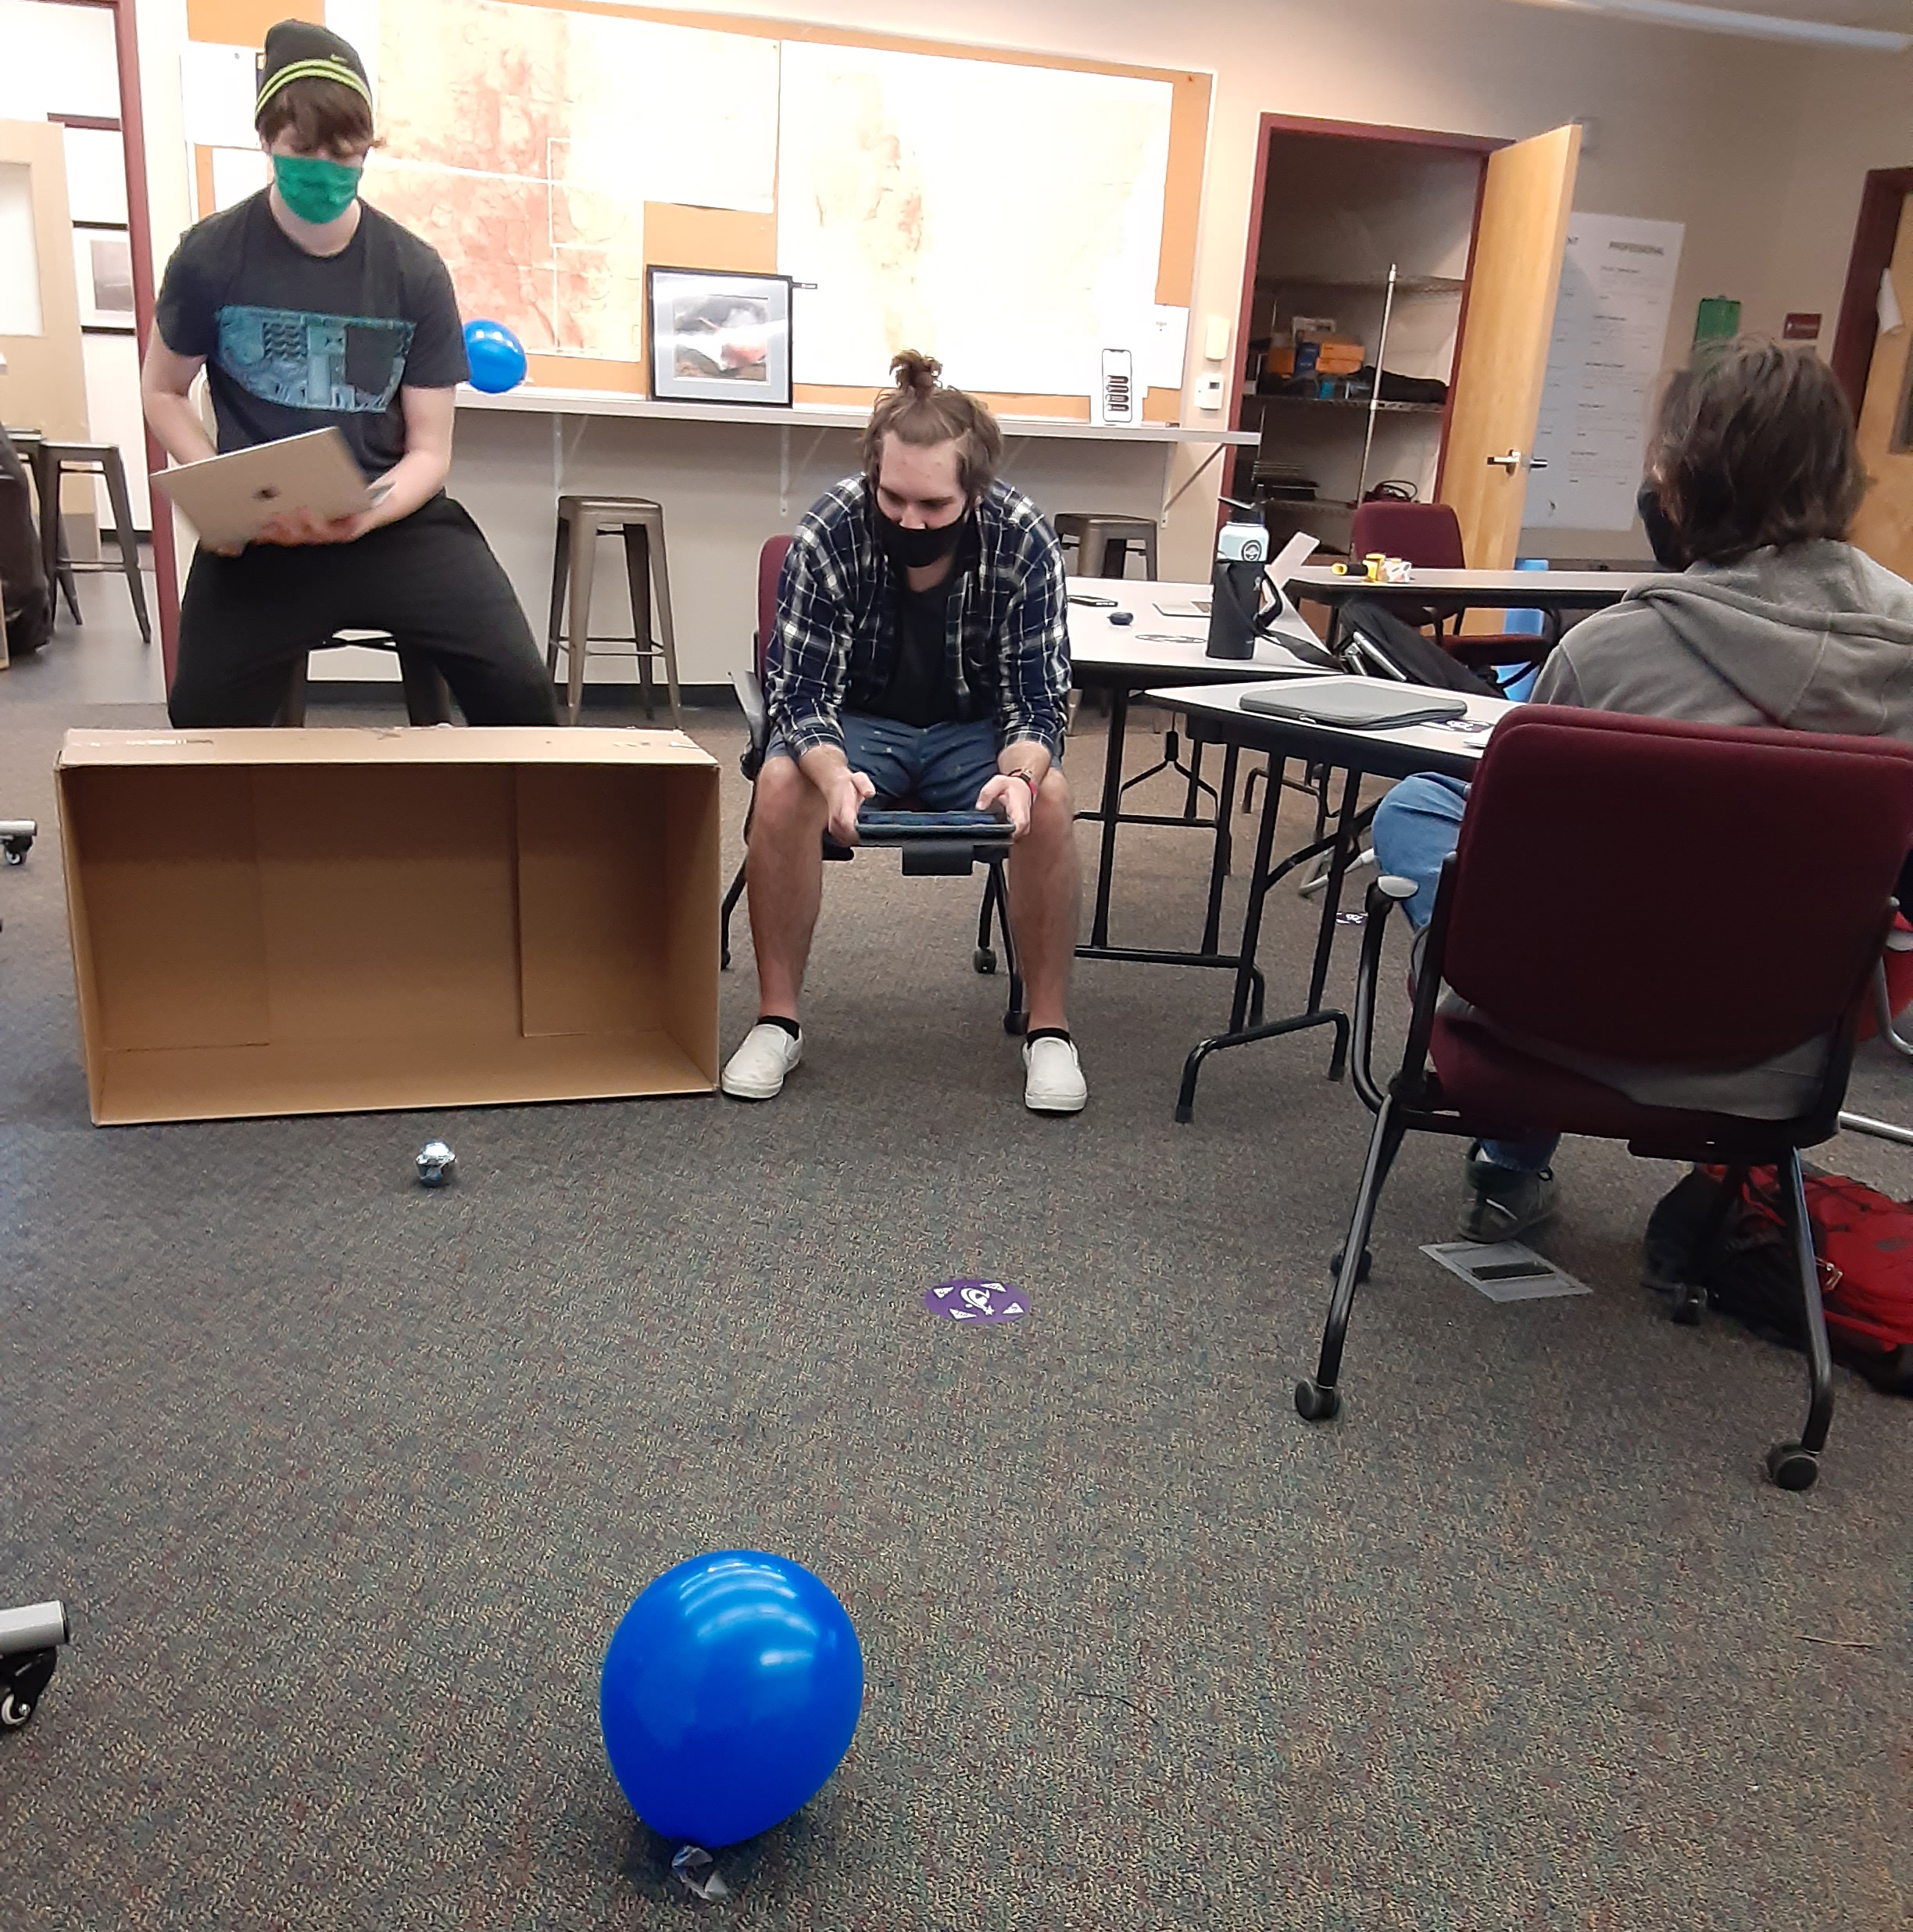 Two students work together on Spheros.